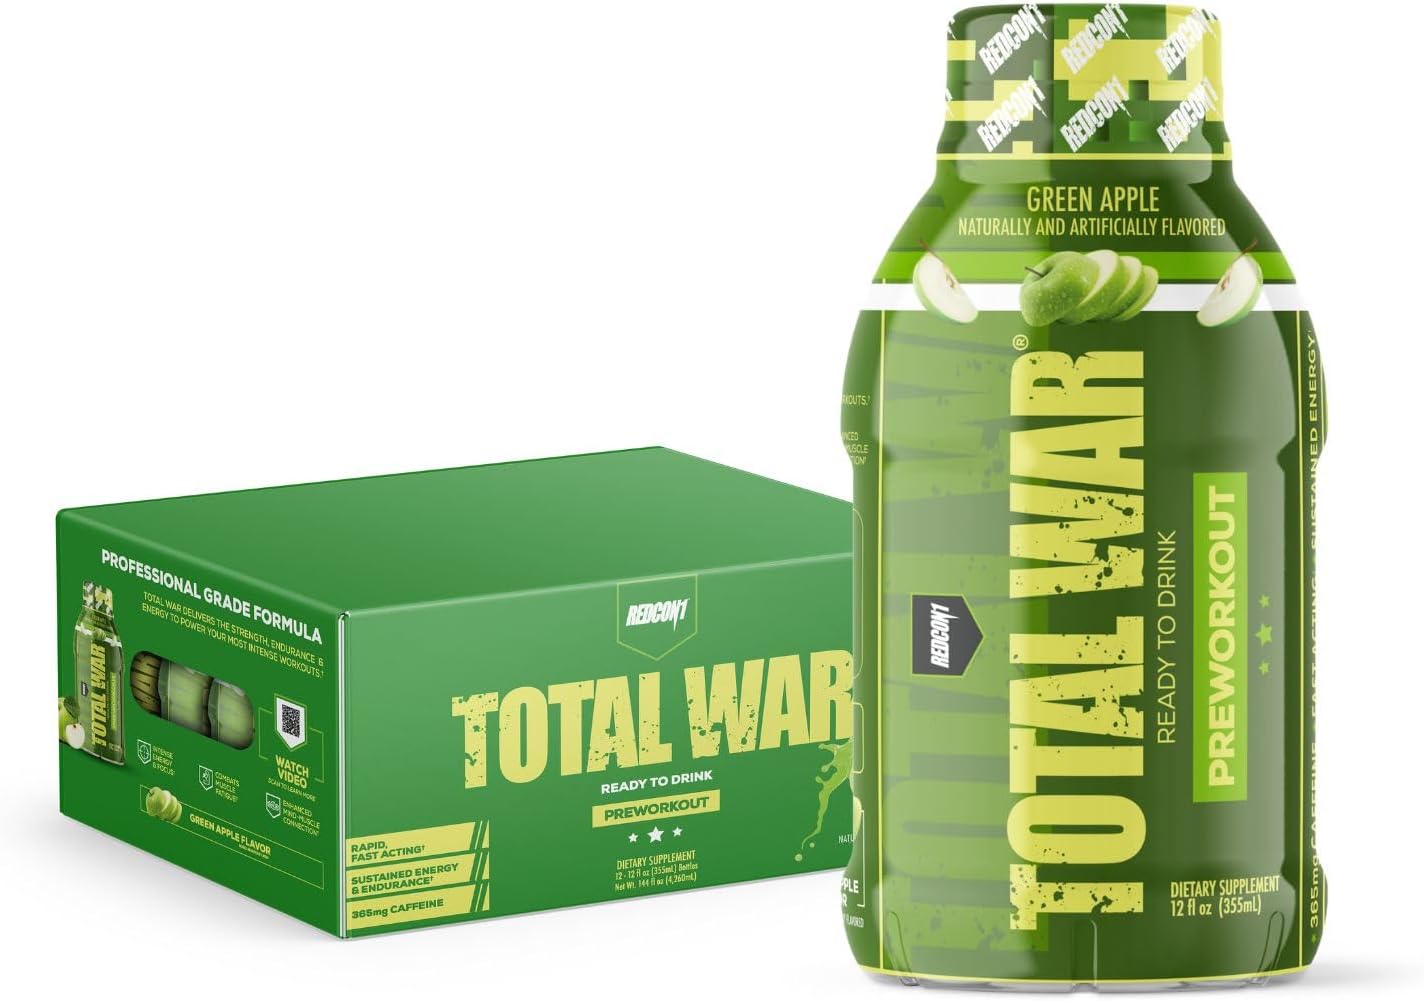 REDCON1 Total War Ready to Drink Preworkout, Green Apple - 350mg of Fa